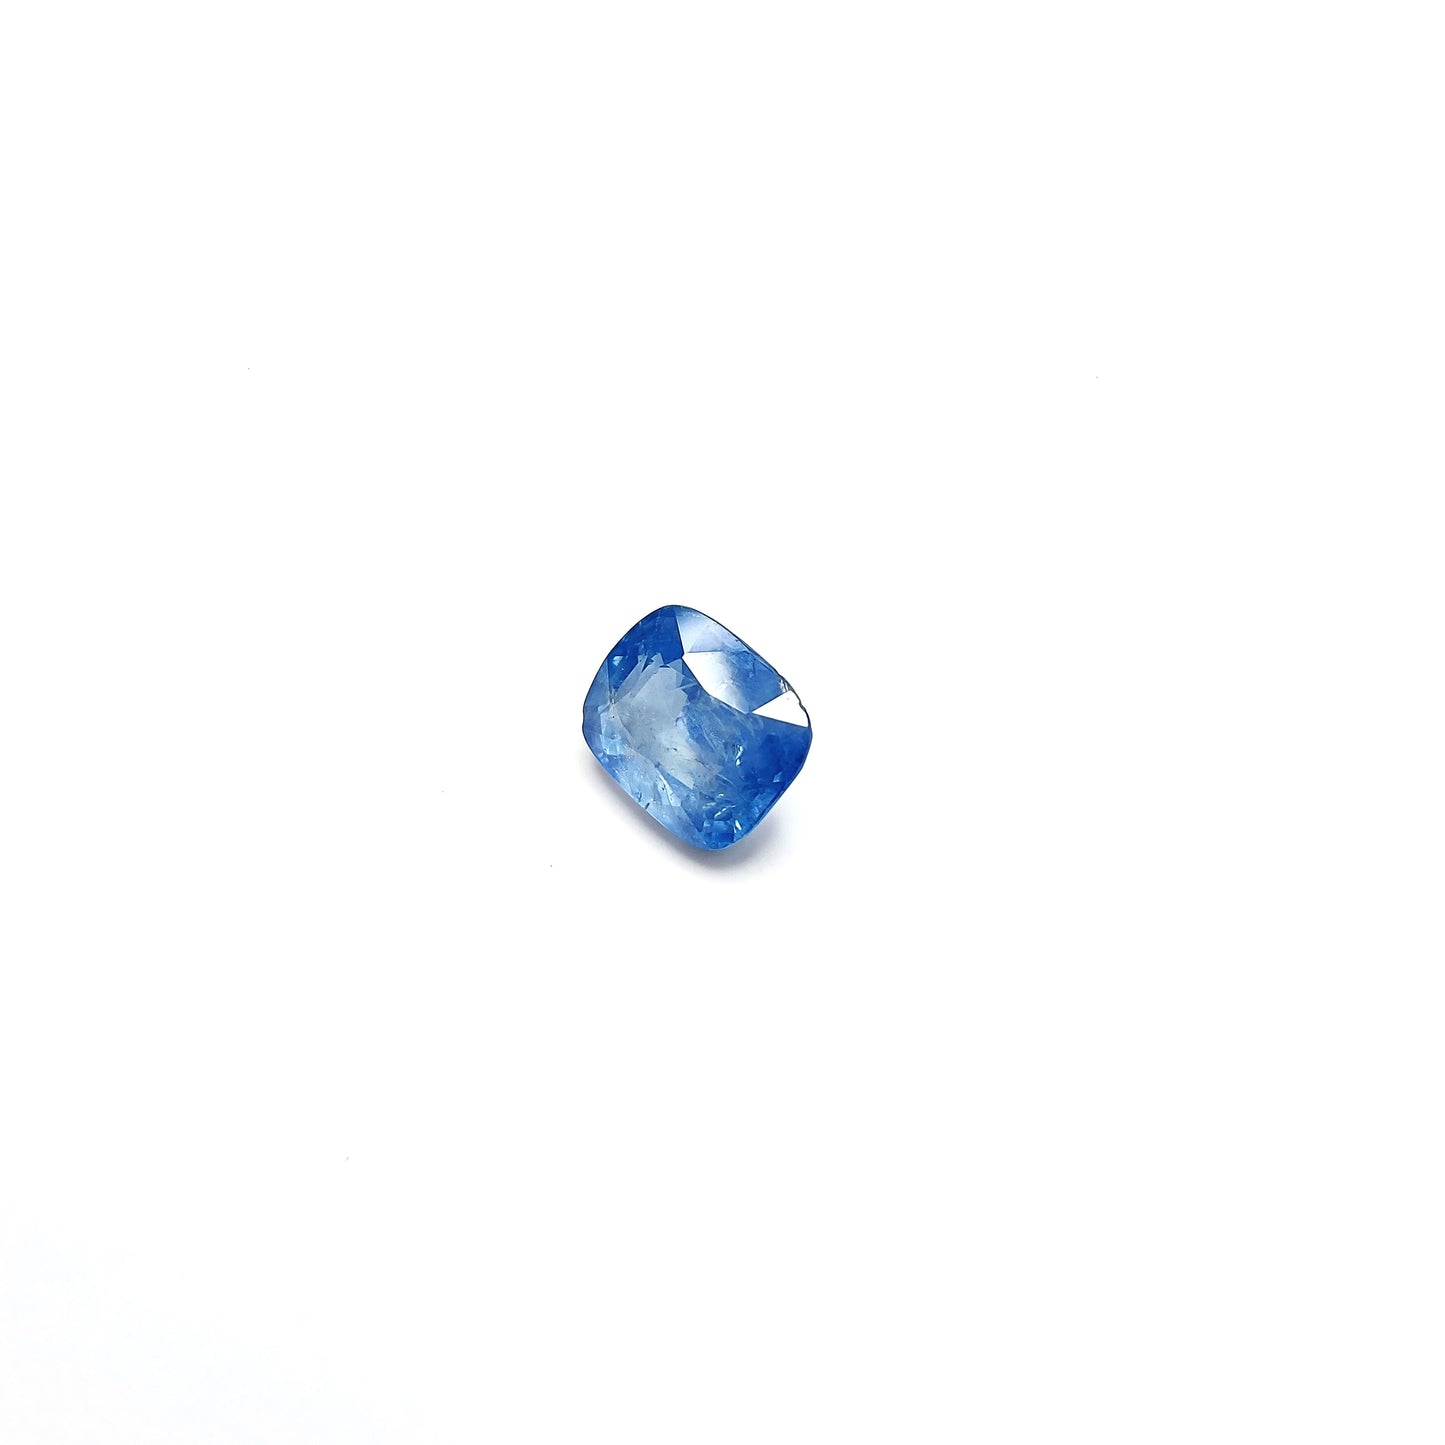 100% Natural Unheated Blue sapphire | 9.66cts